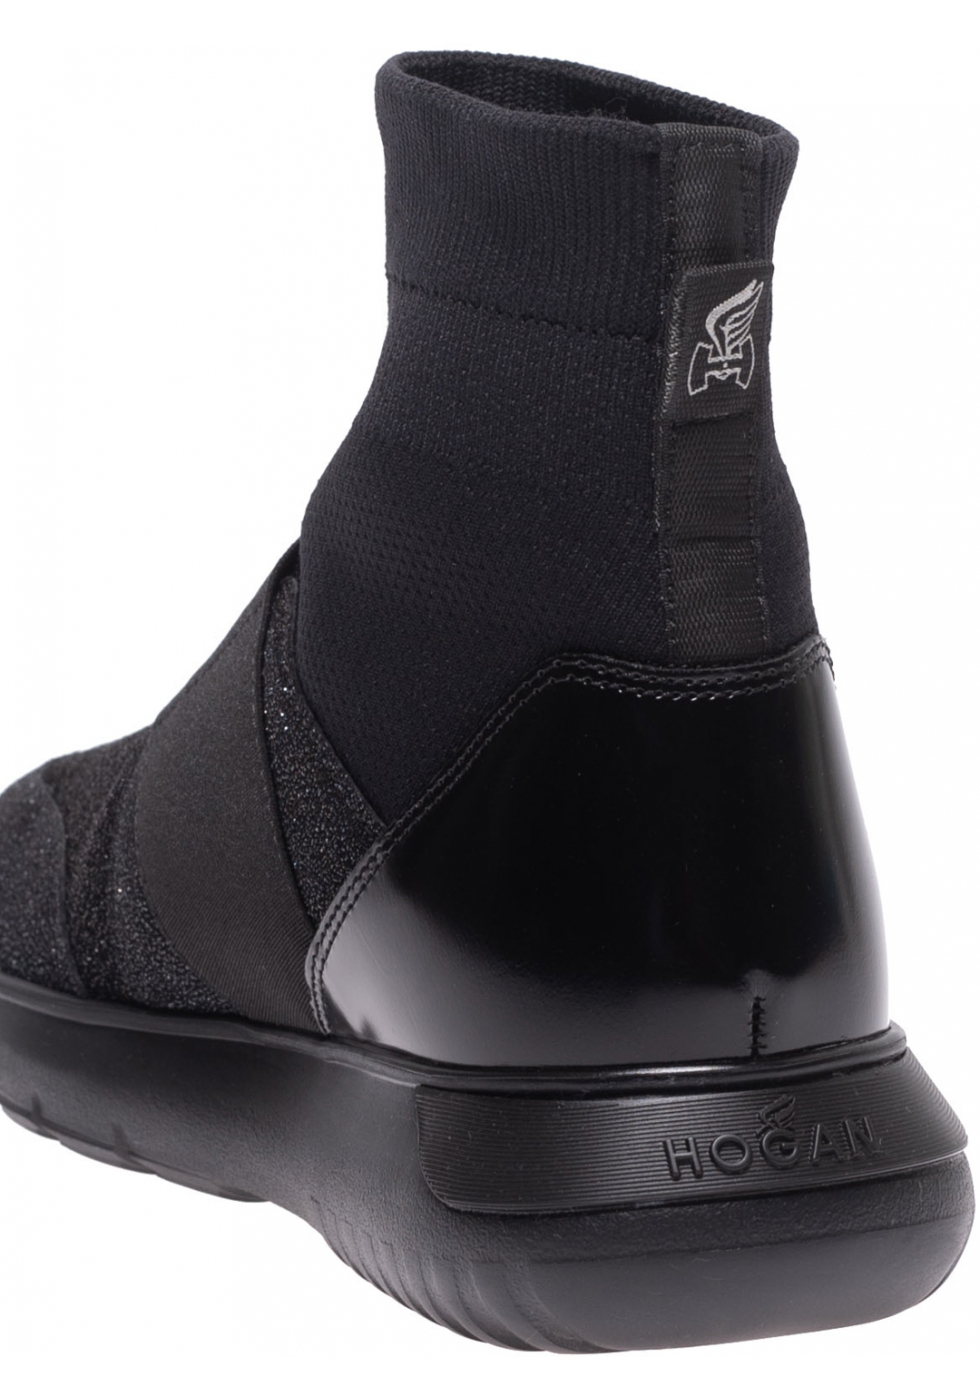 Hogan Women's fashion high sock sneakers in black leather and fabric ...